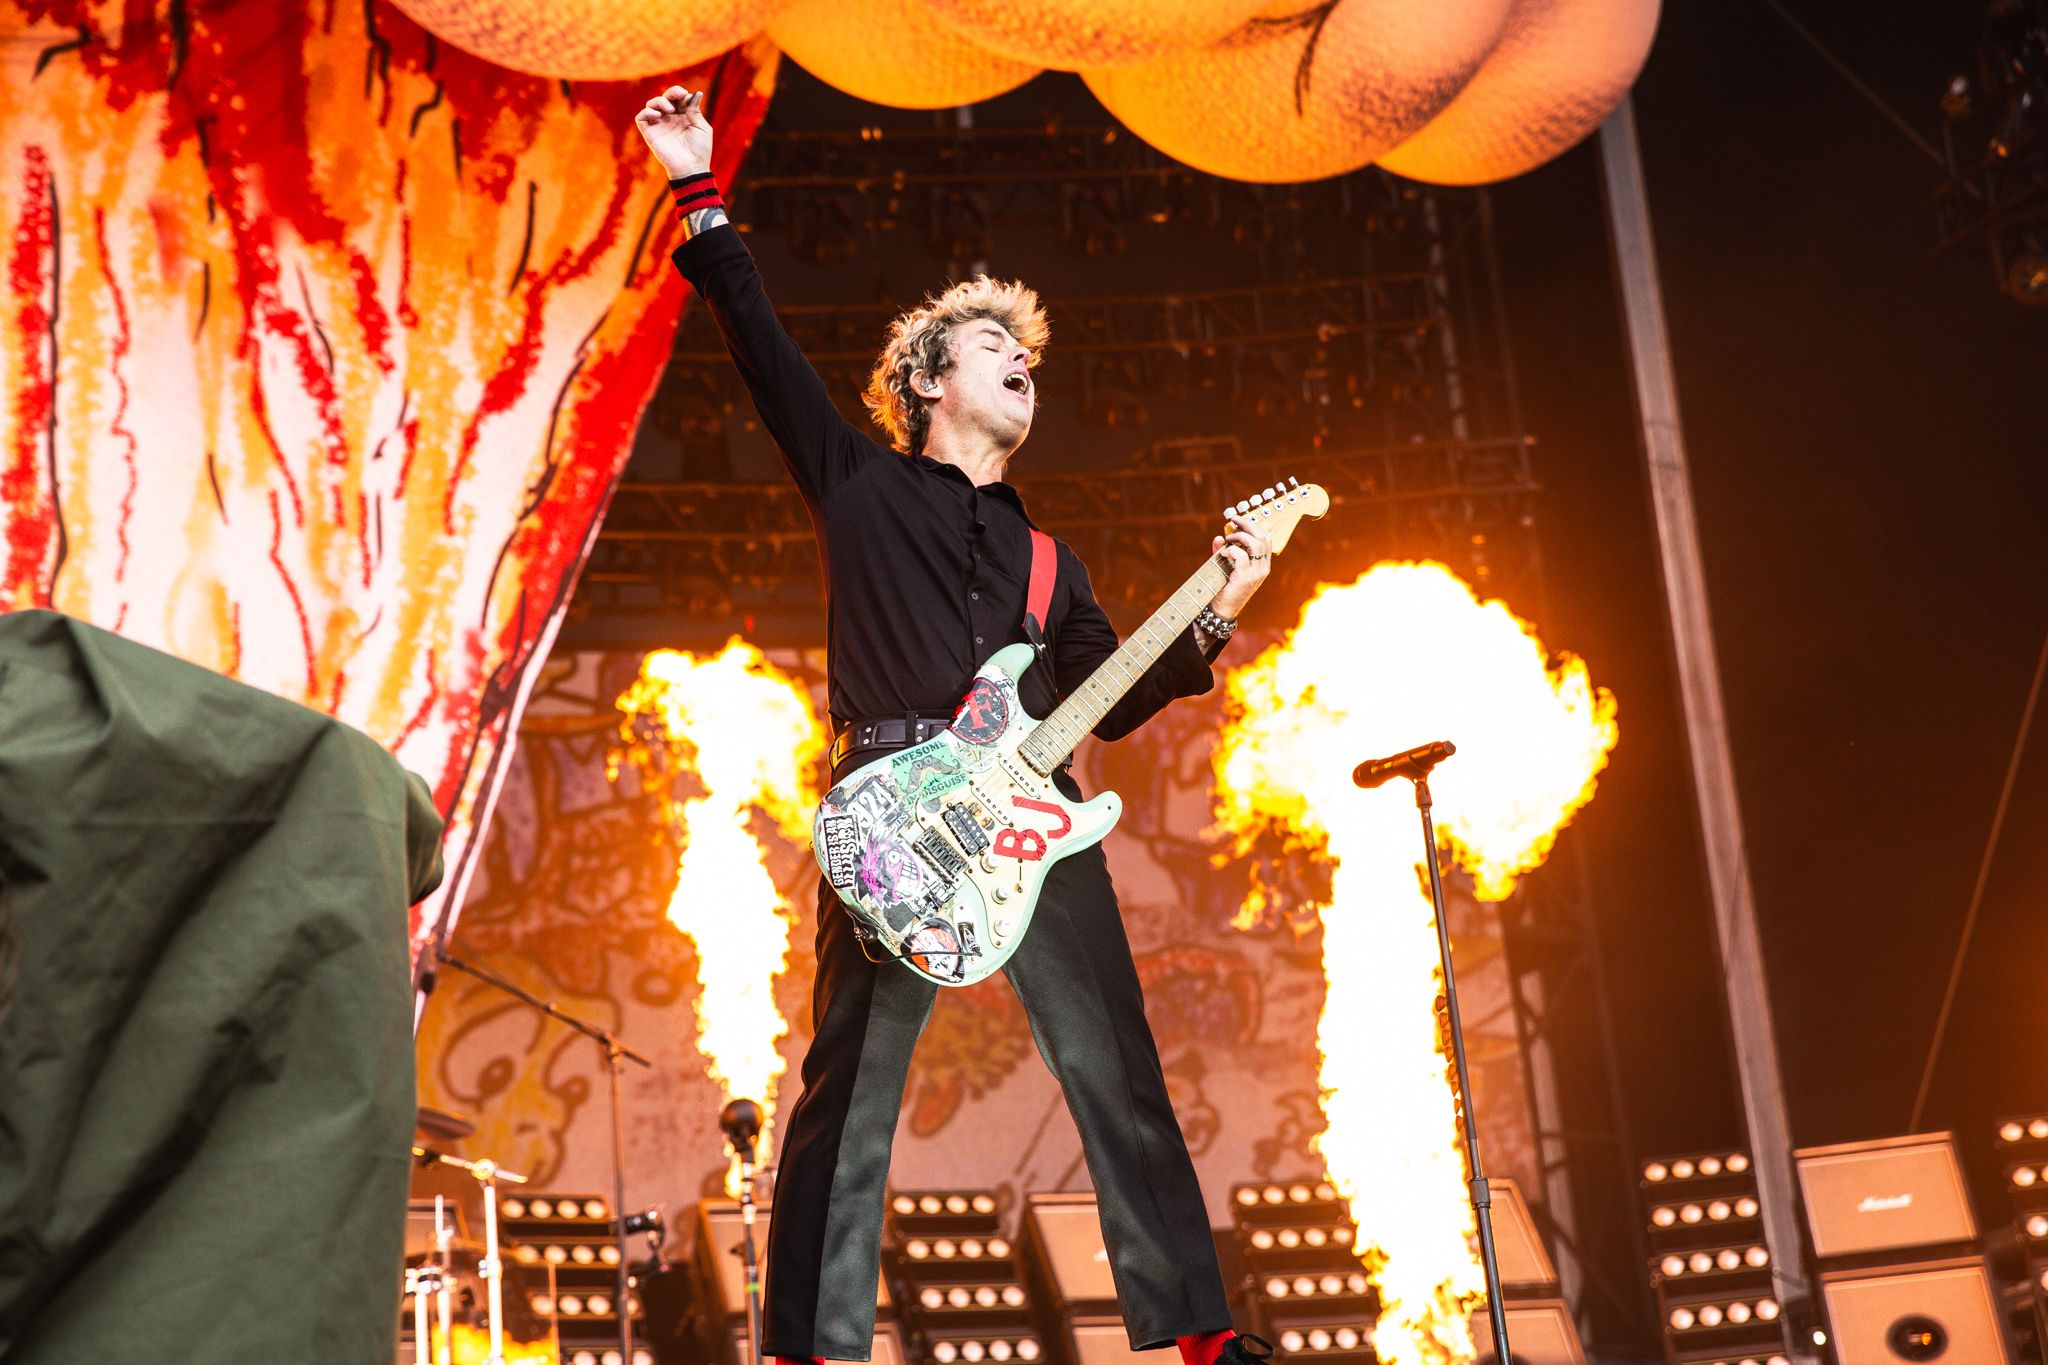 Green Day frontman Billie Joe Armstrong, along with bassist and backing vocalist Mike Dirnt, and drummer Tre Cool, perform a sold-out show at Emirates Old Trafford on the opening night of The Saviors tour